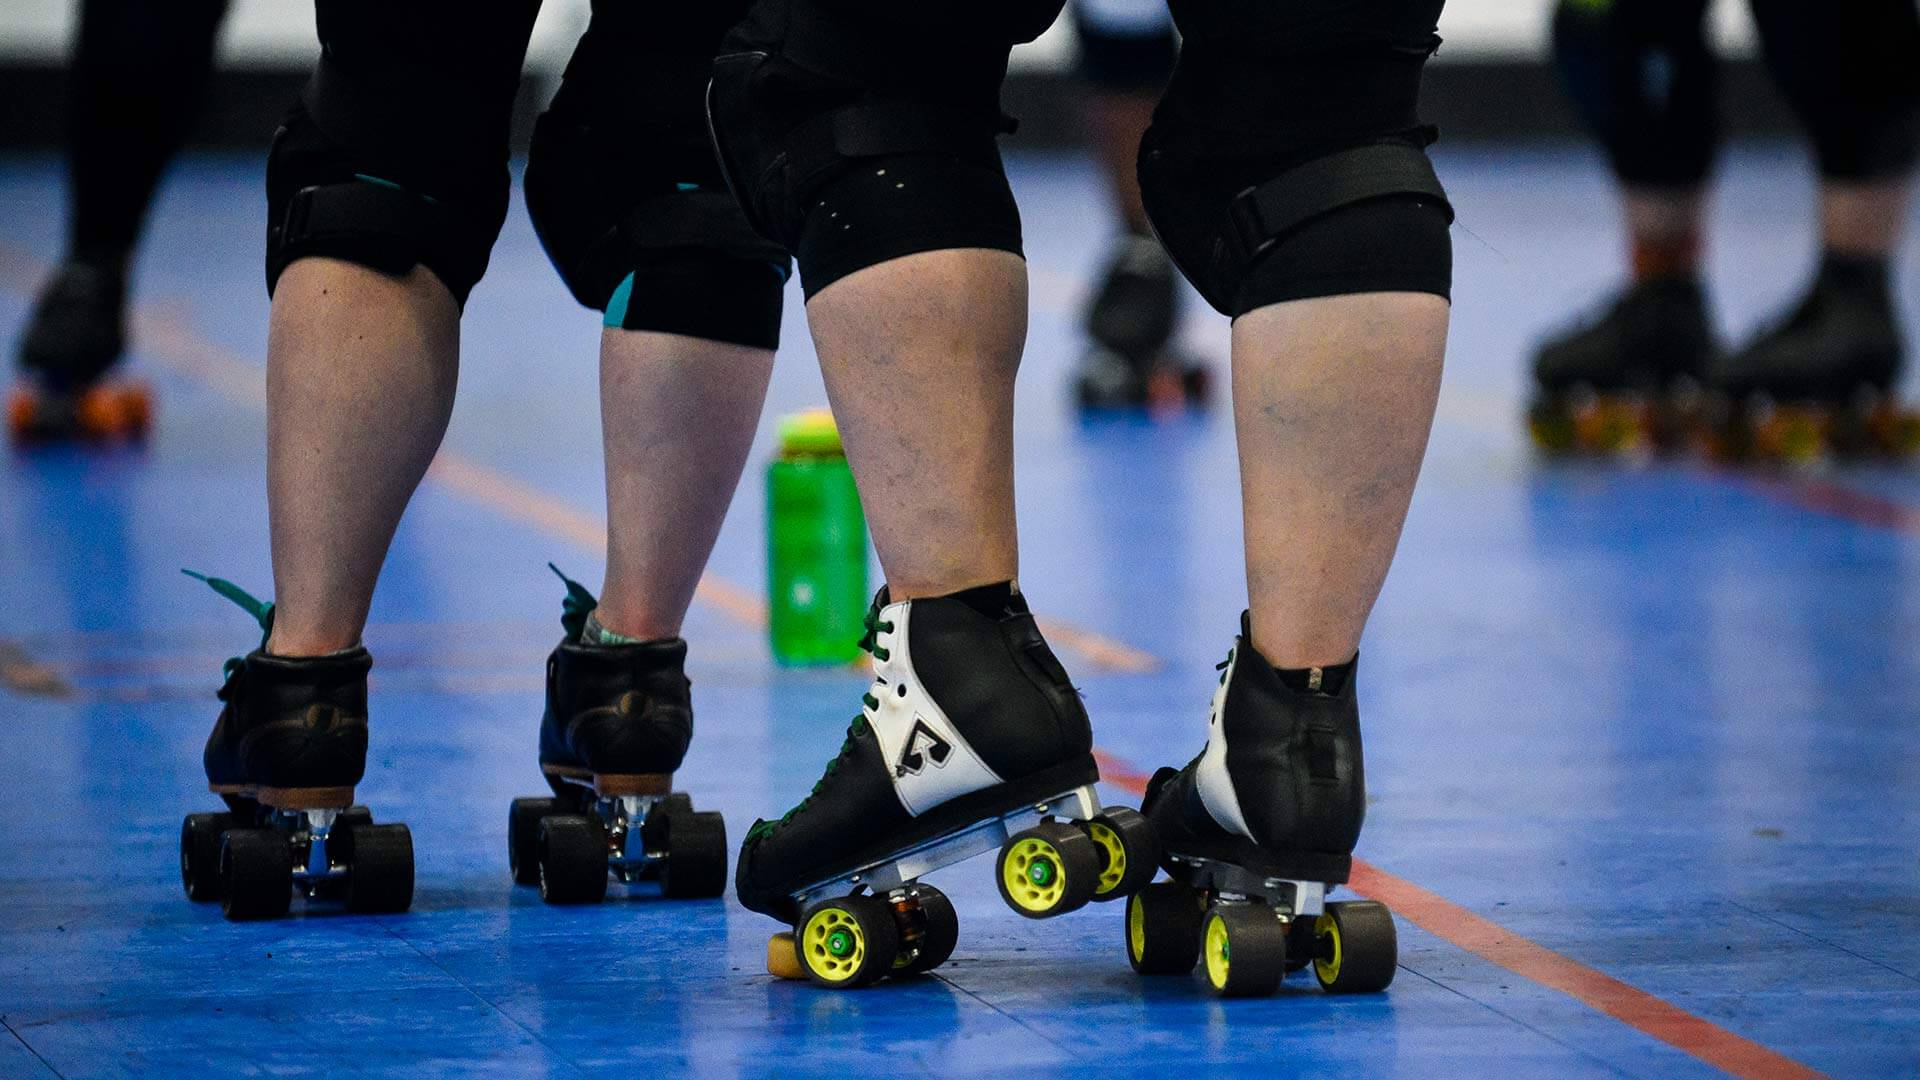 Closeup of roller skates at a roller derby practice